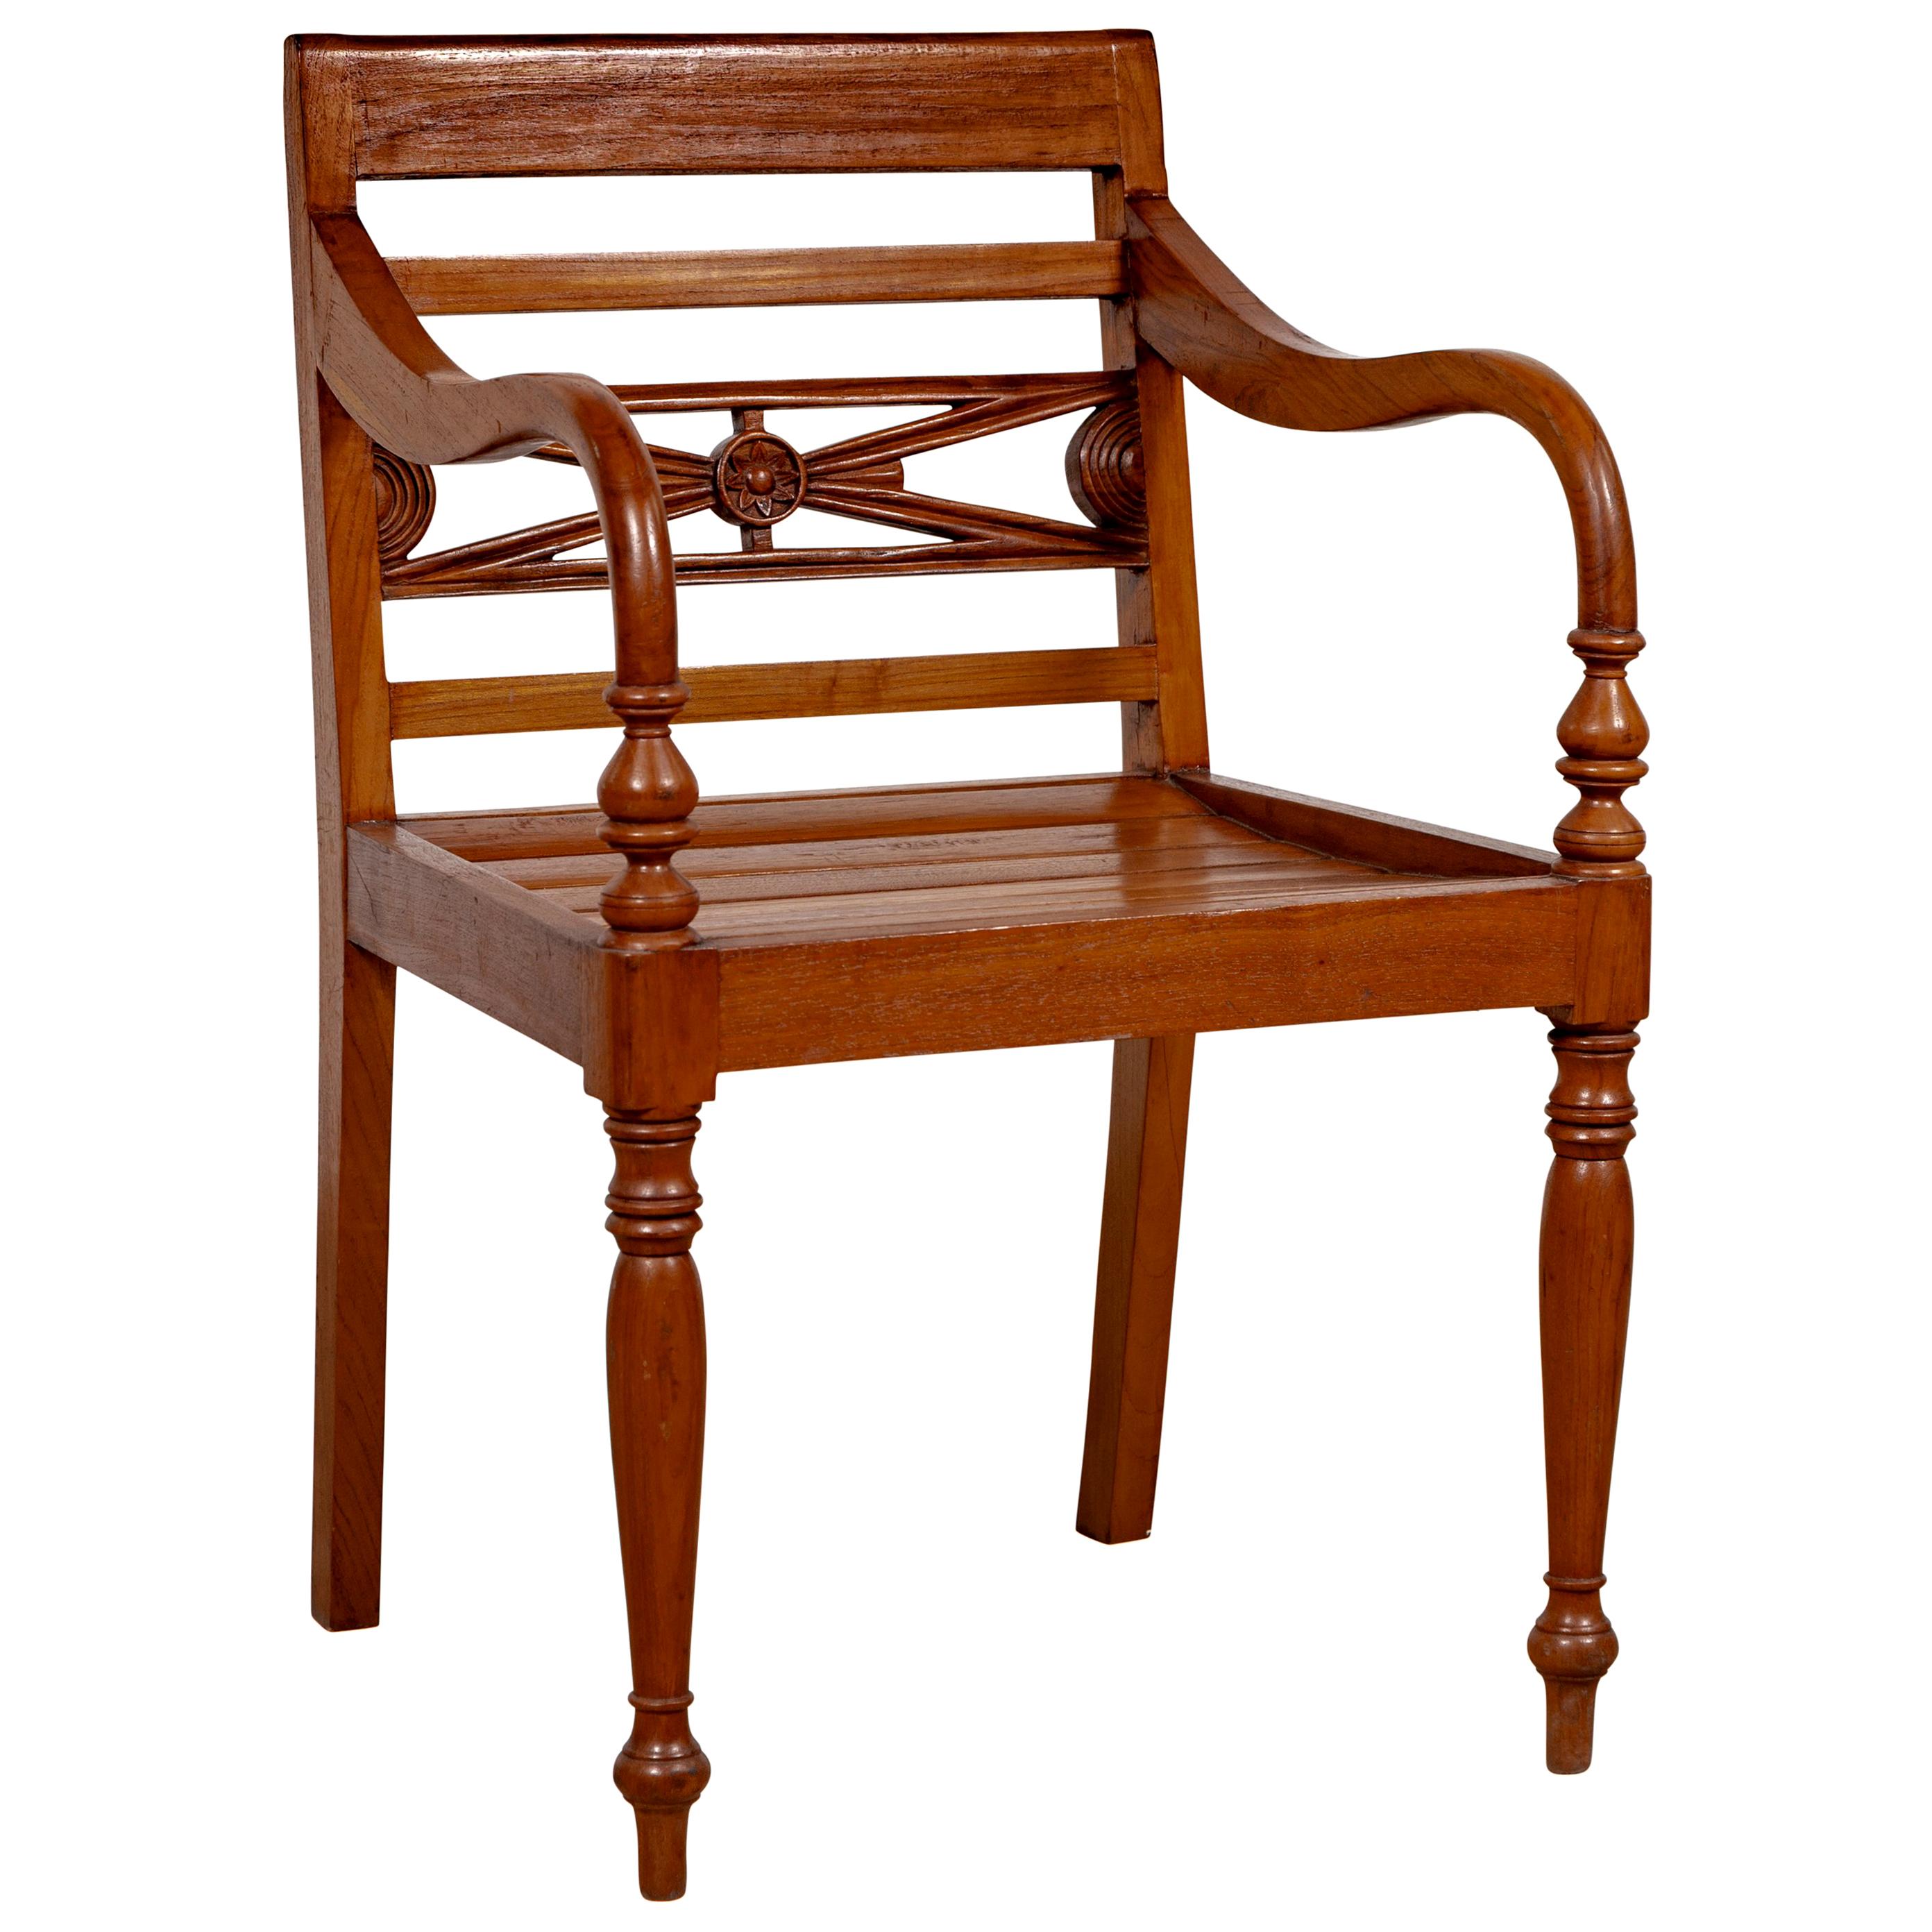 Early 20th Century Captain's Chair from Bali with Slatted Wood and Loop Arms